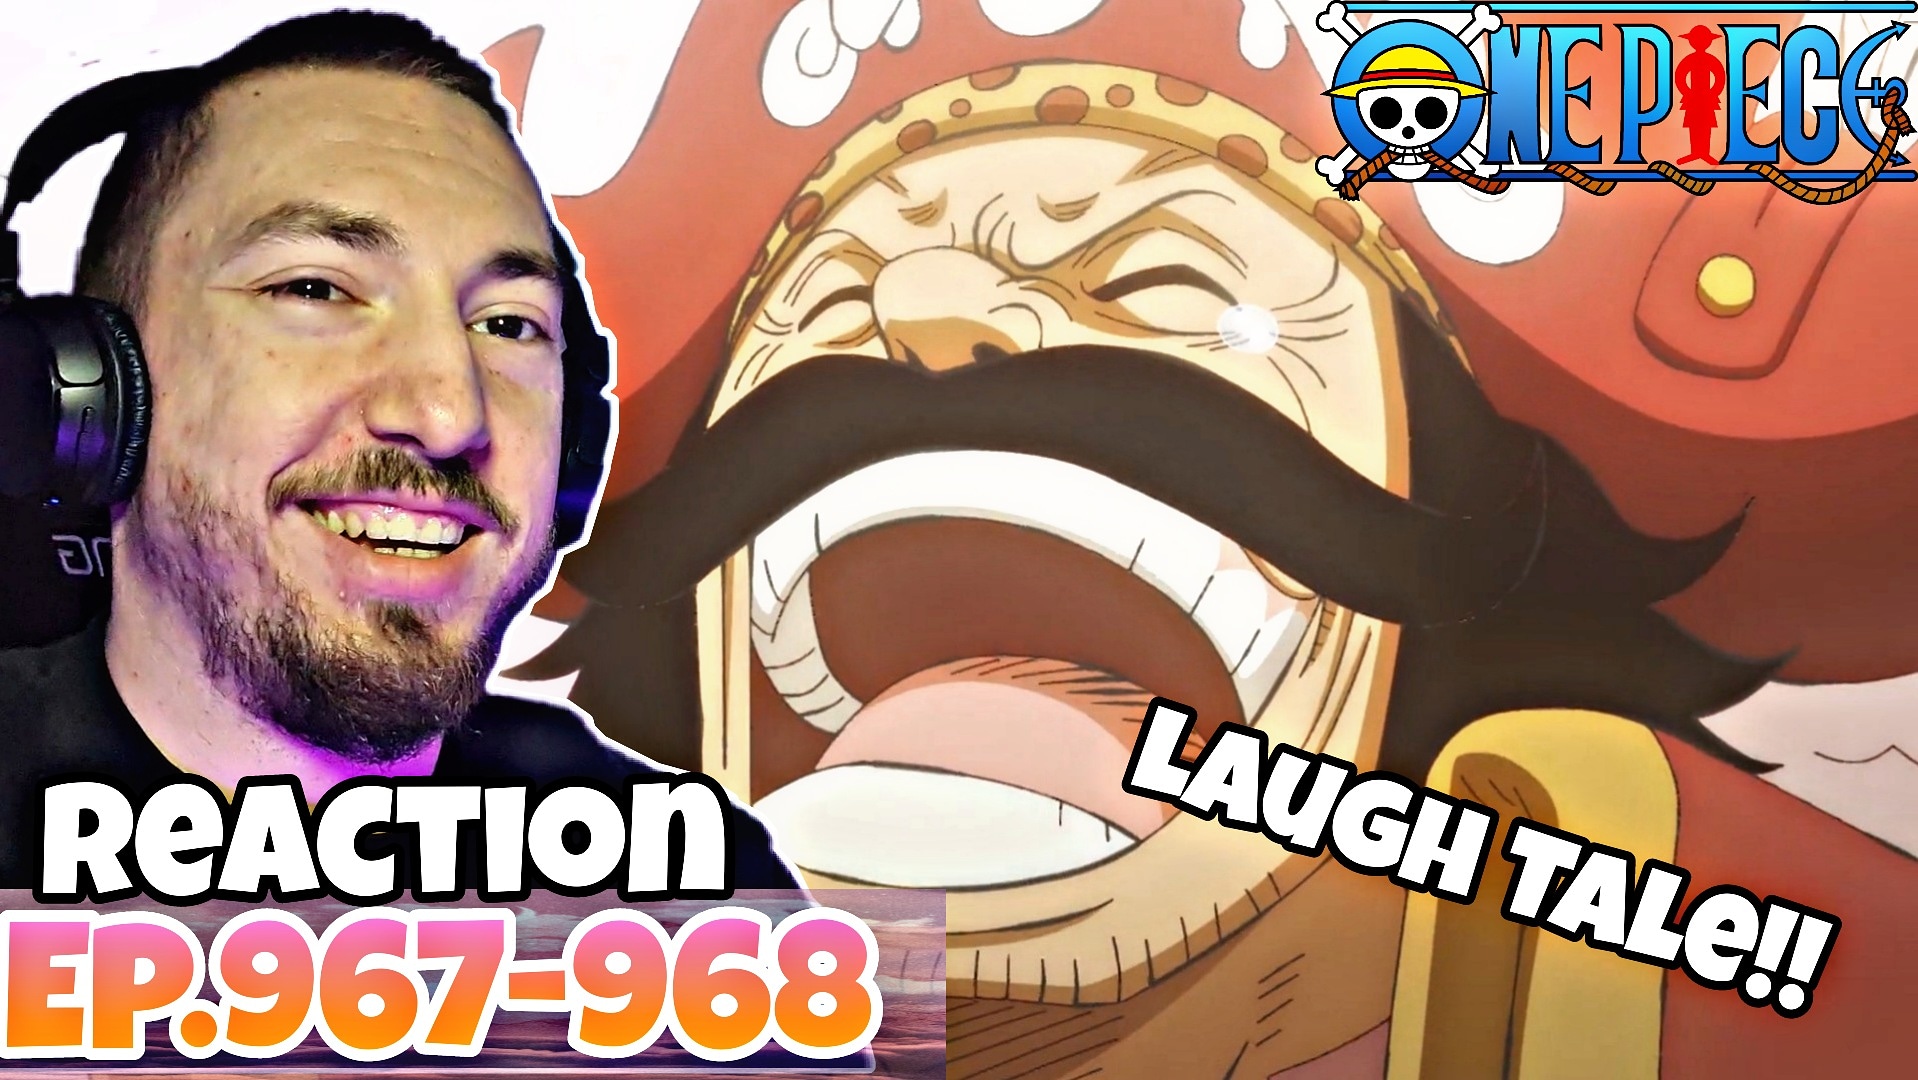 Smbro Reactions One Piece Episode 967 968 The King Of Pirates Laugh Tale Reaction T Co 7gyx80b5xq Onepiece Onepiece968 Onepiece967 Onepieceedit Op Anime Goldroger Anime Animes Joyboy Laughtale Onepiecelaughtale